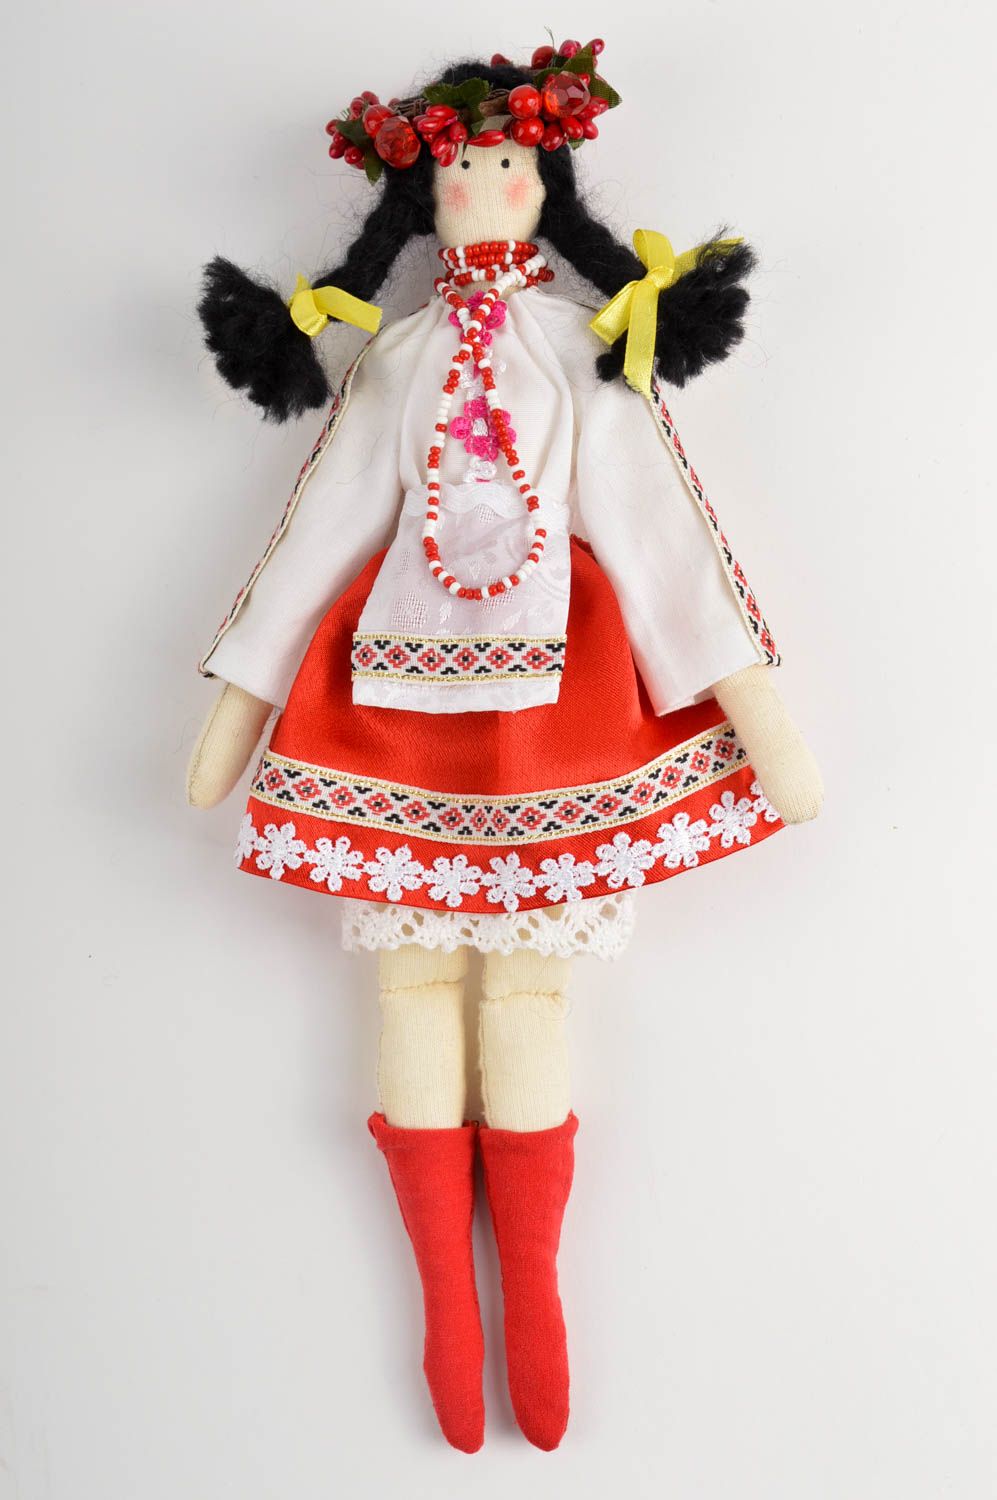 Handmade doll toy in national costume designer childrens toy decoration ideas photo 2